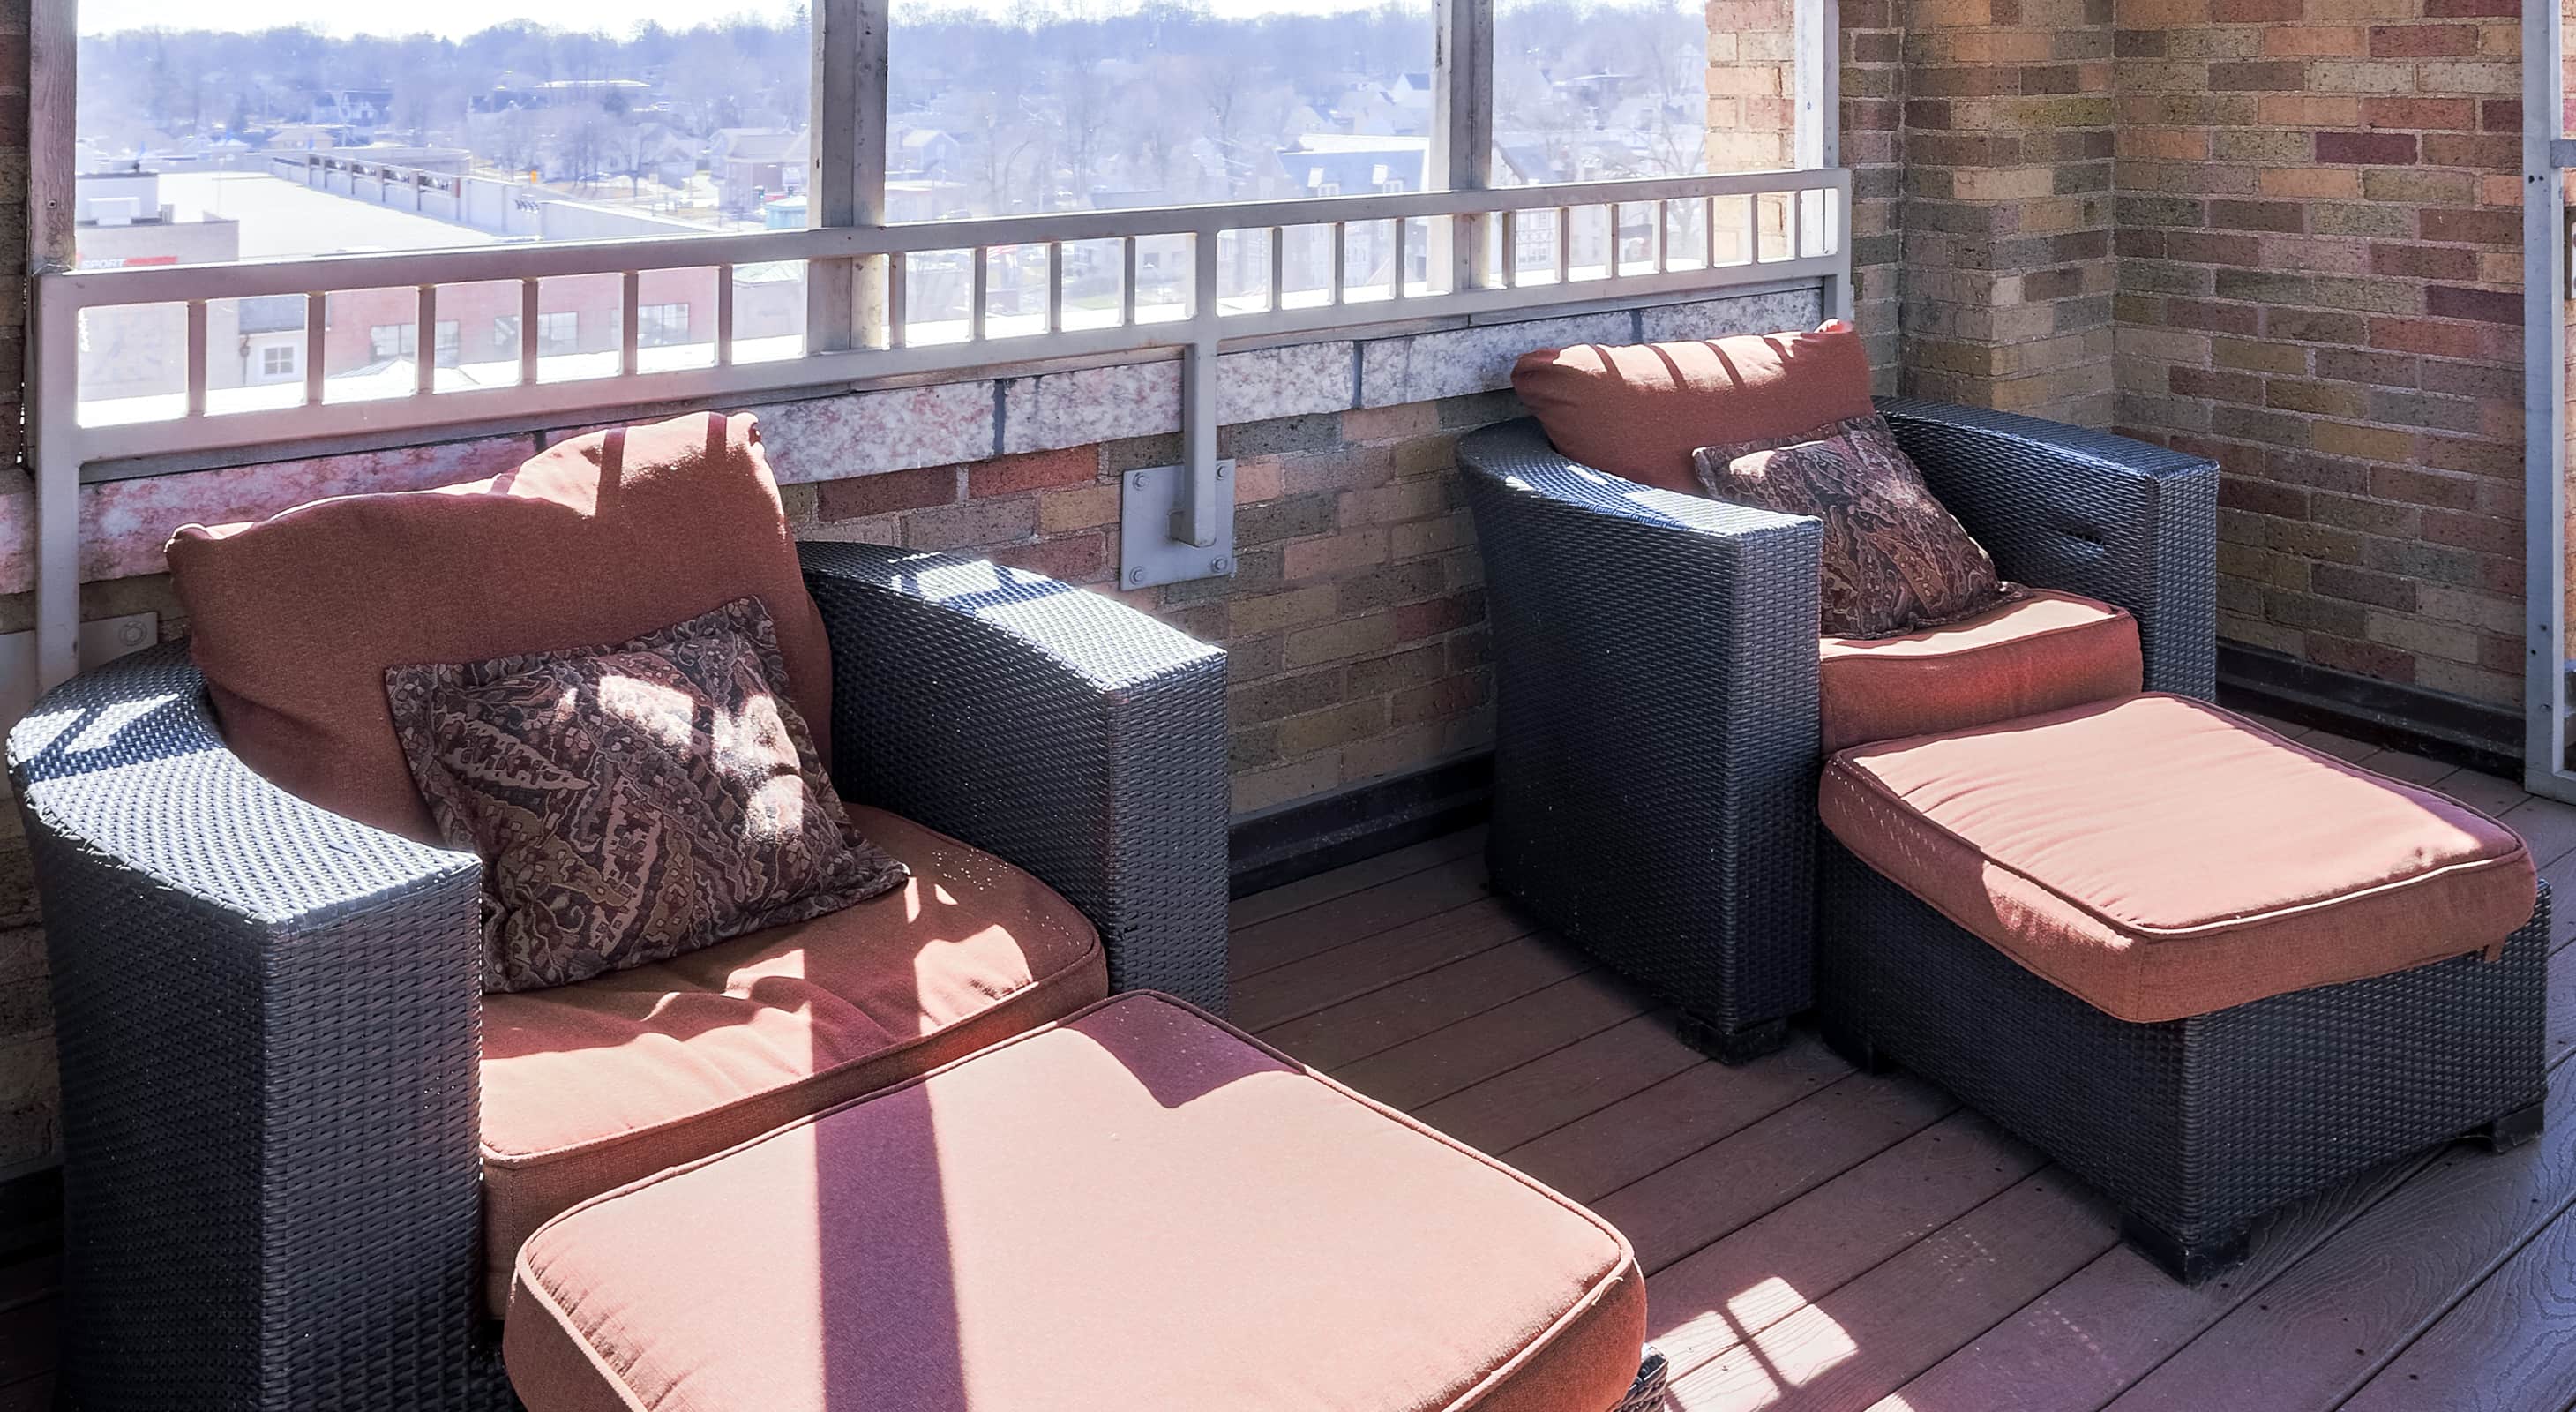 Seating area on rooftop patio of Penthouse Suite in our St. Charles, IL hotel and event venue